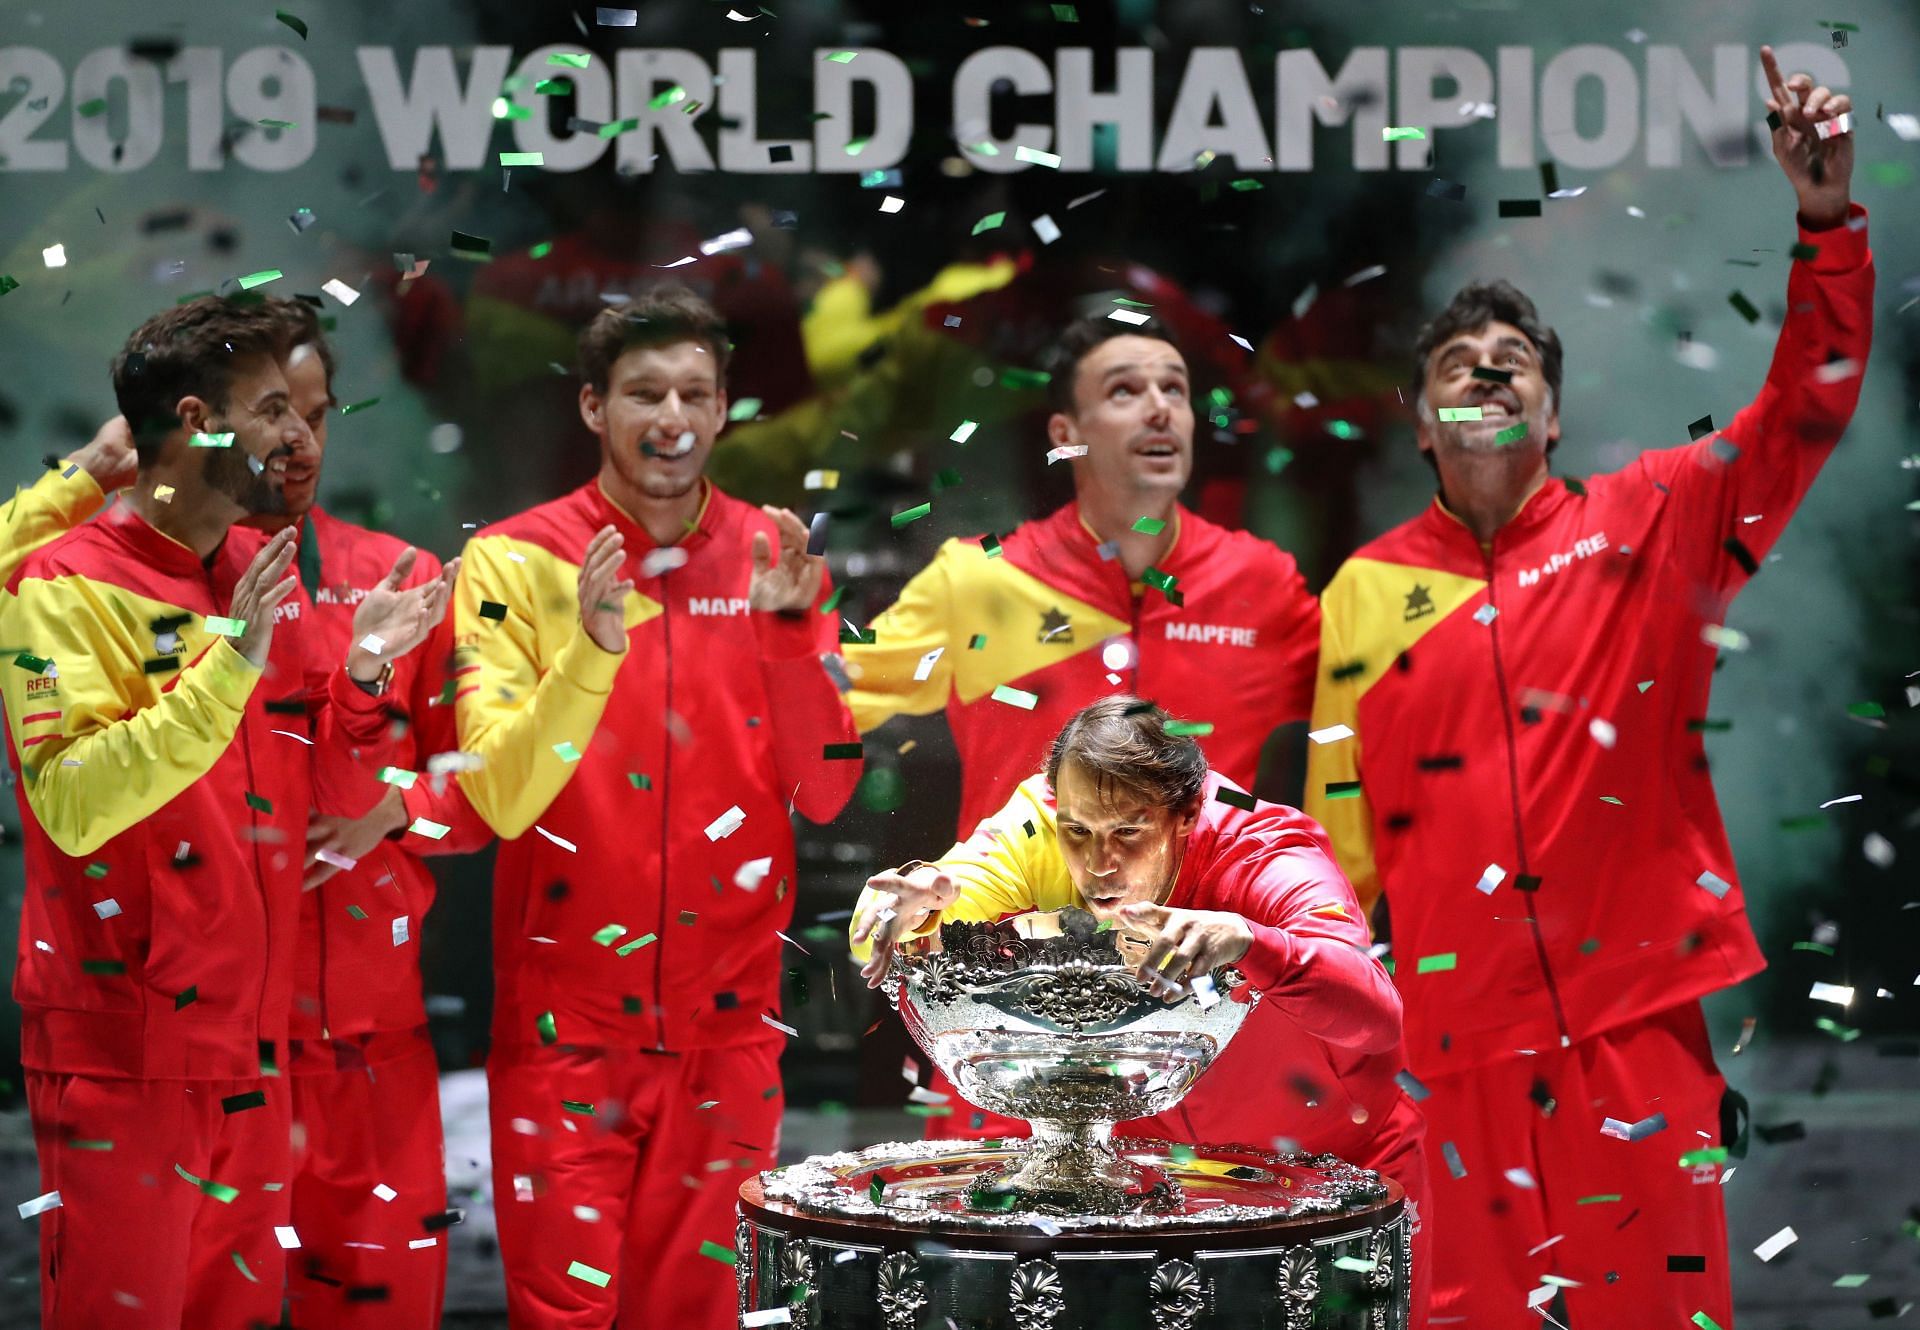 Rafael Nadal is a 5-time winner at the Davis Cup with Spain